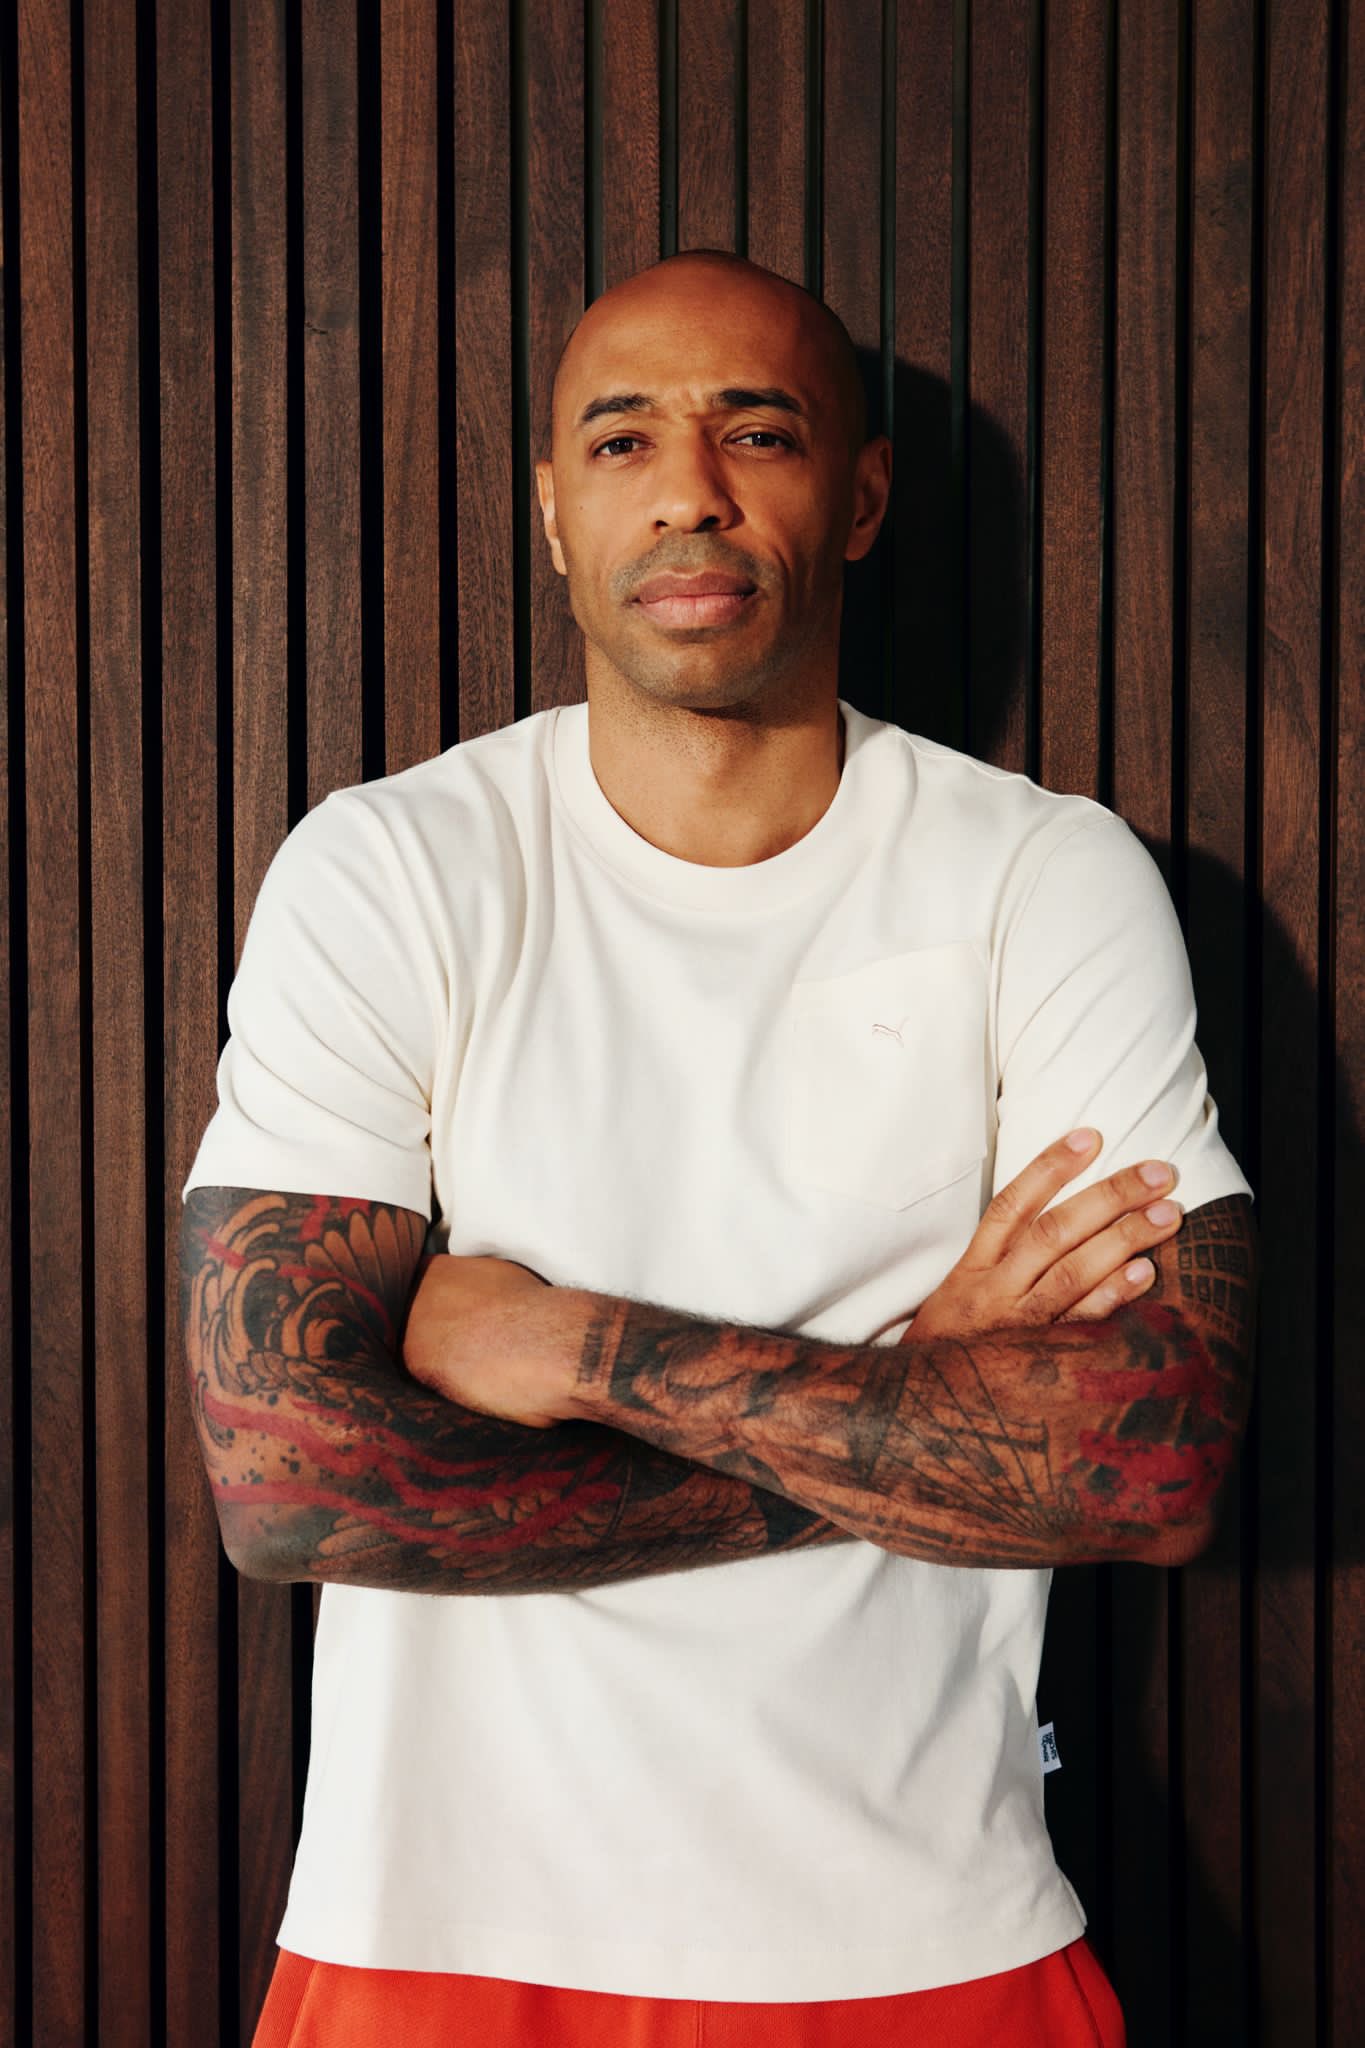 thierry henry tattoos